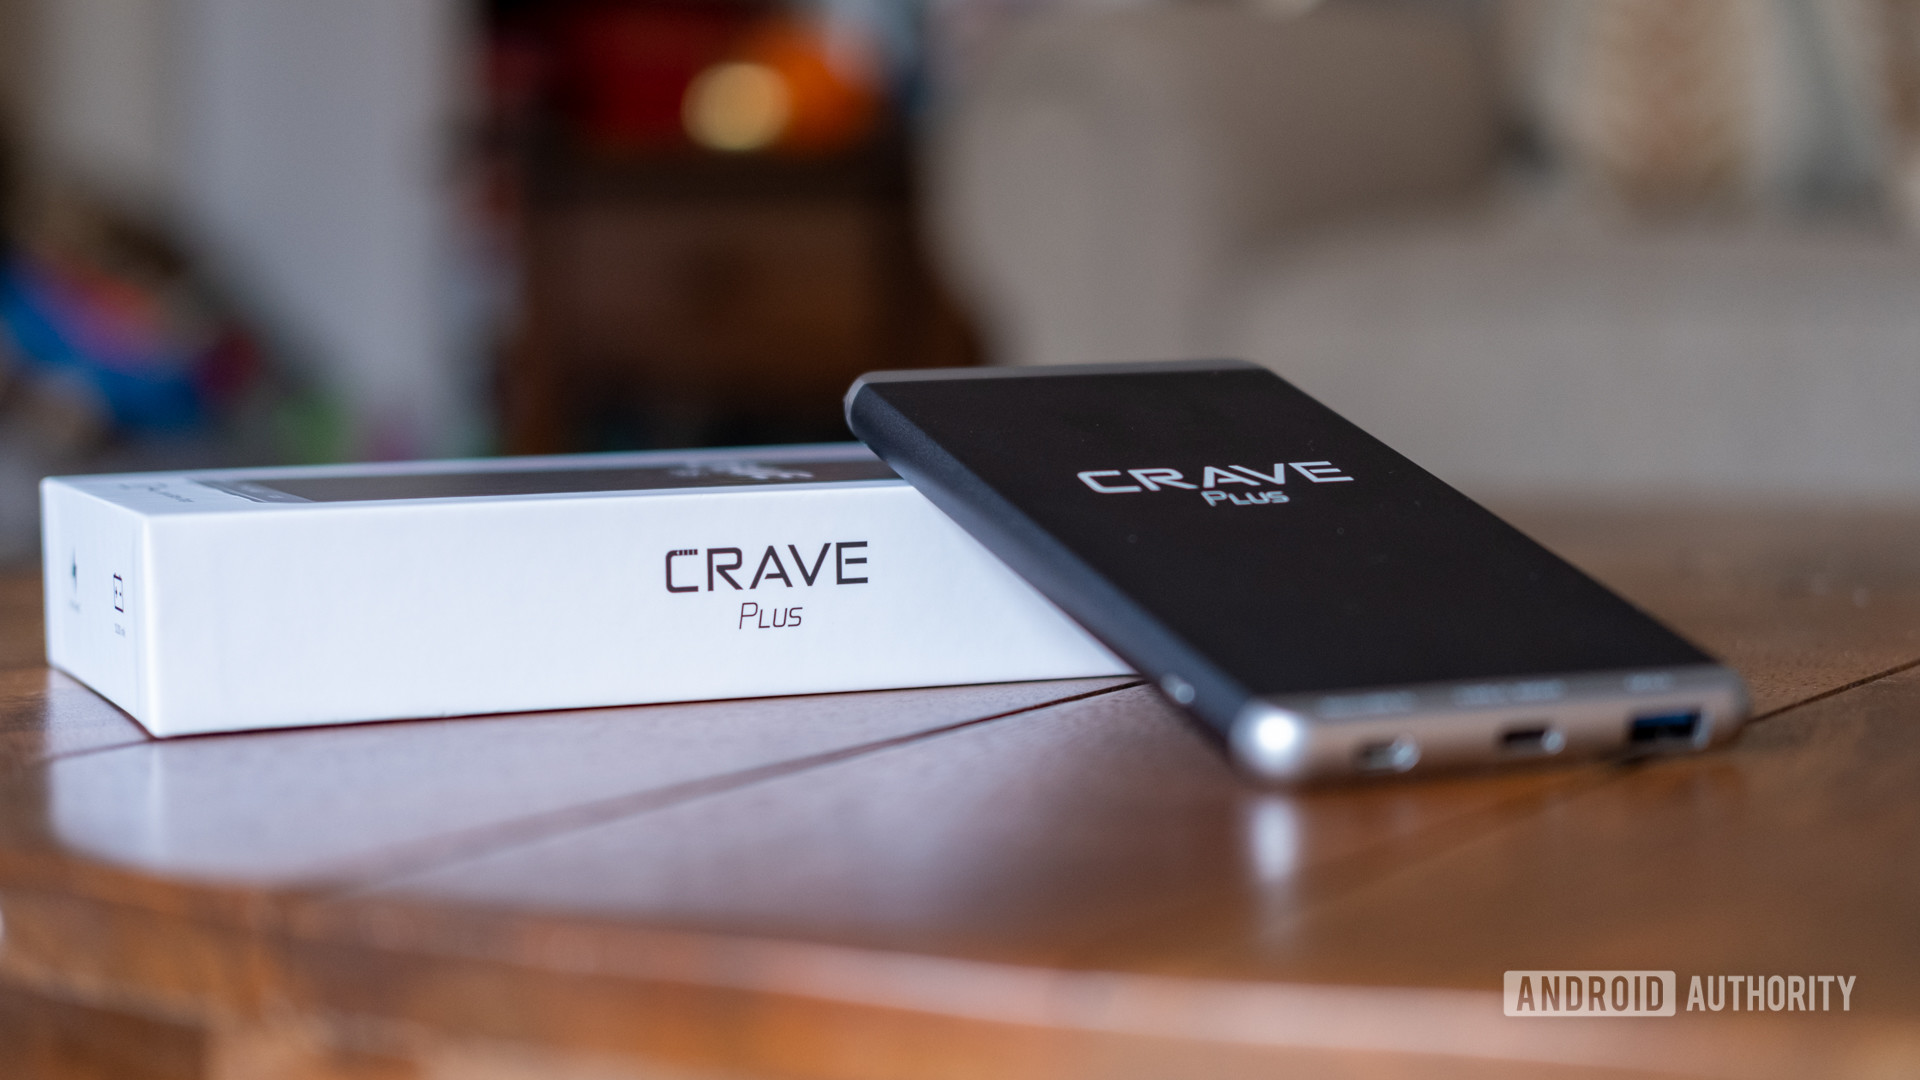 The Crave Plus leaning on its box